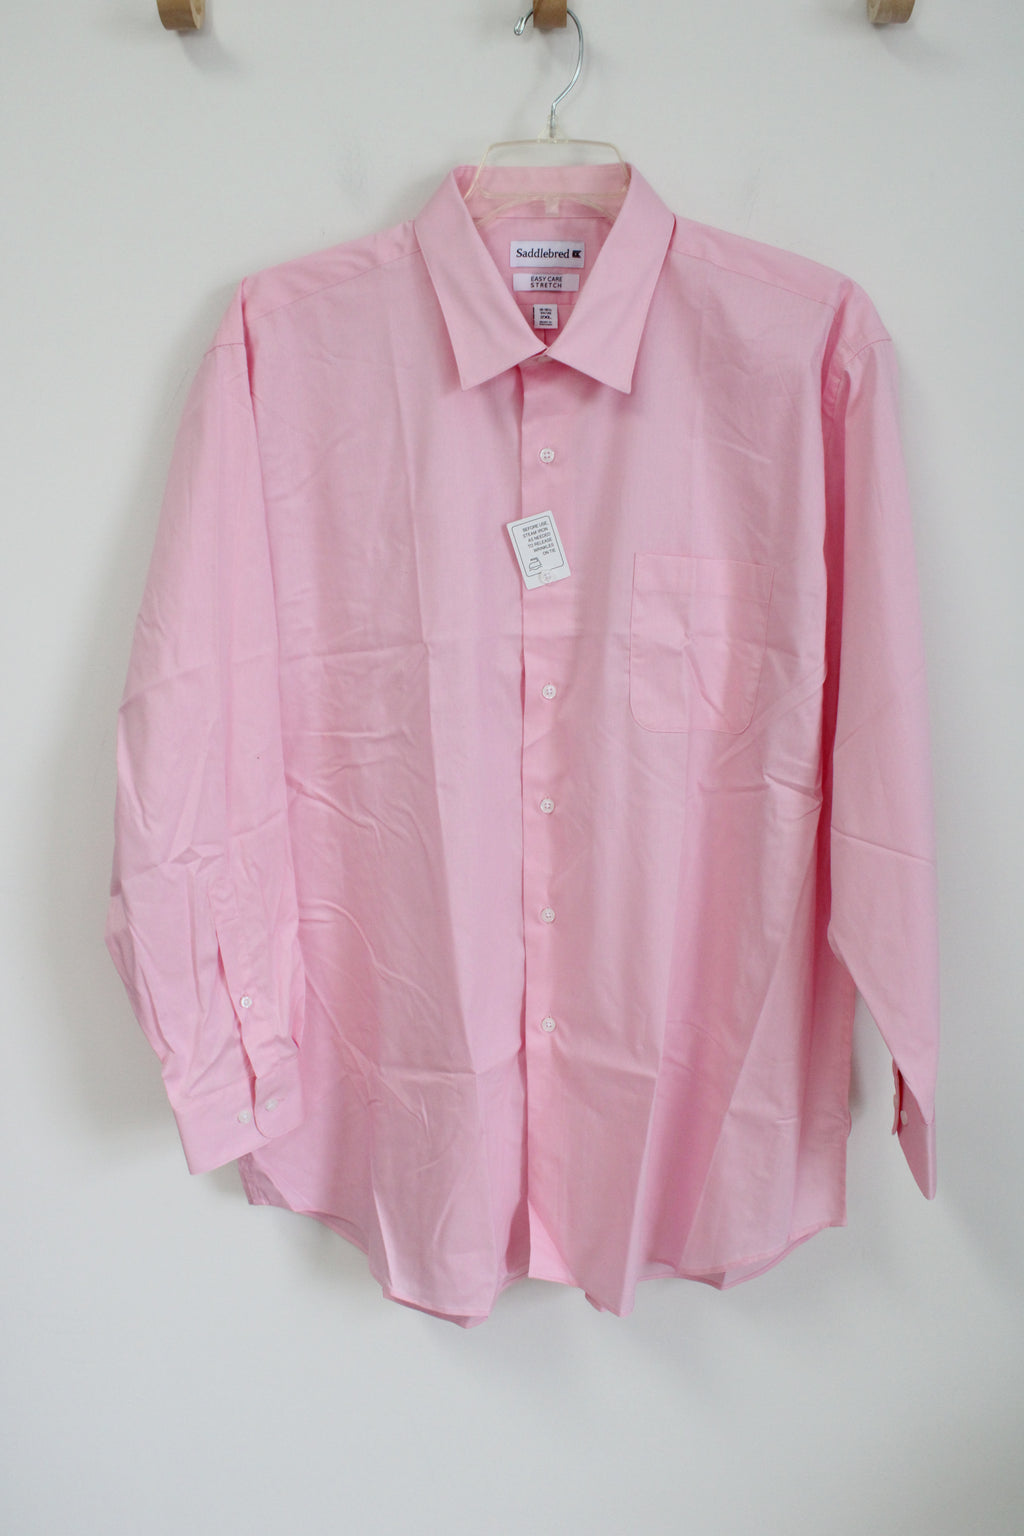 NEW Saddlebred Easy Care Stretch Pink Button Down Shirt | 2XL